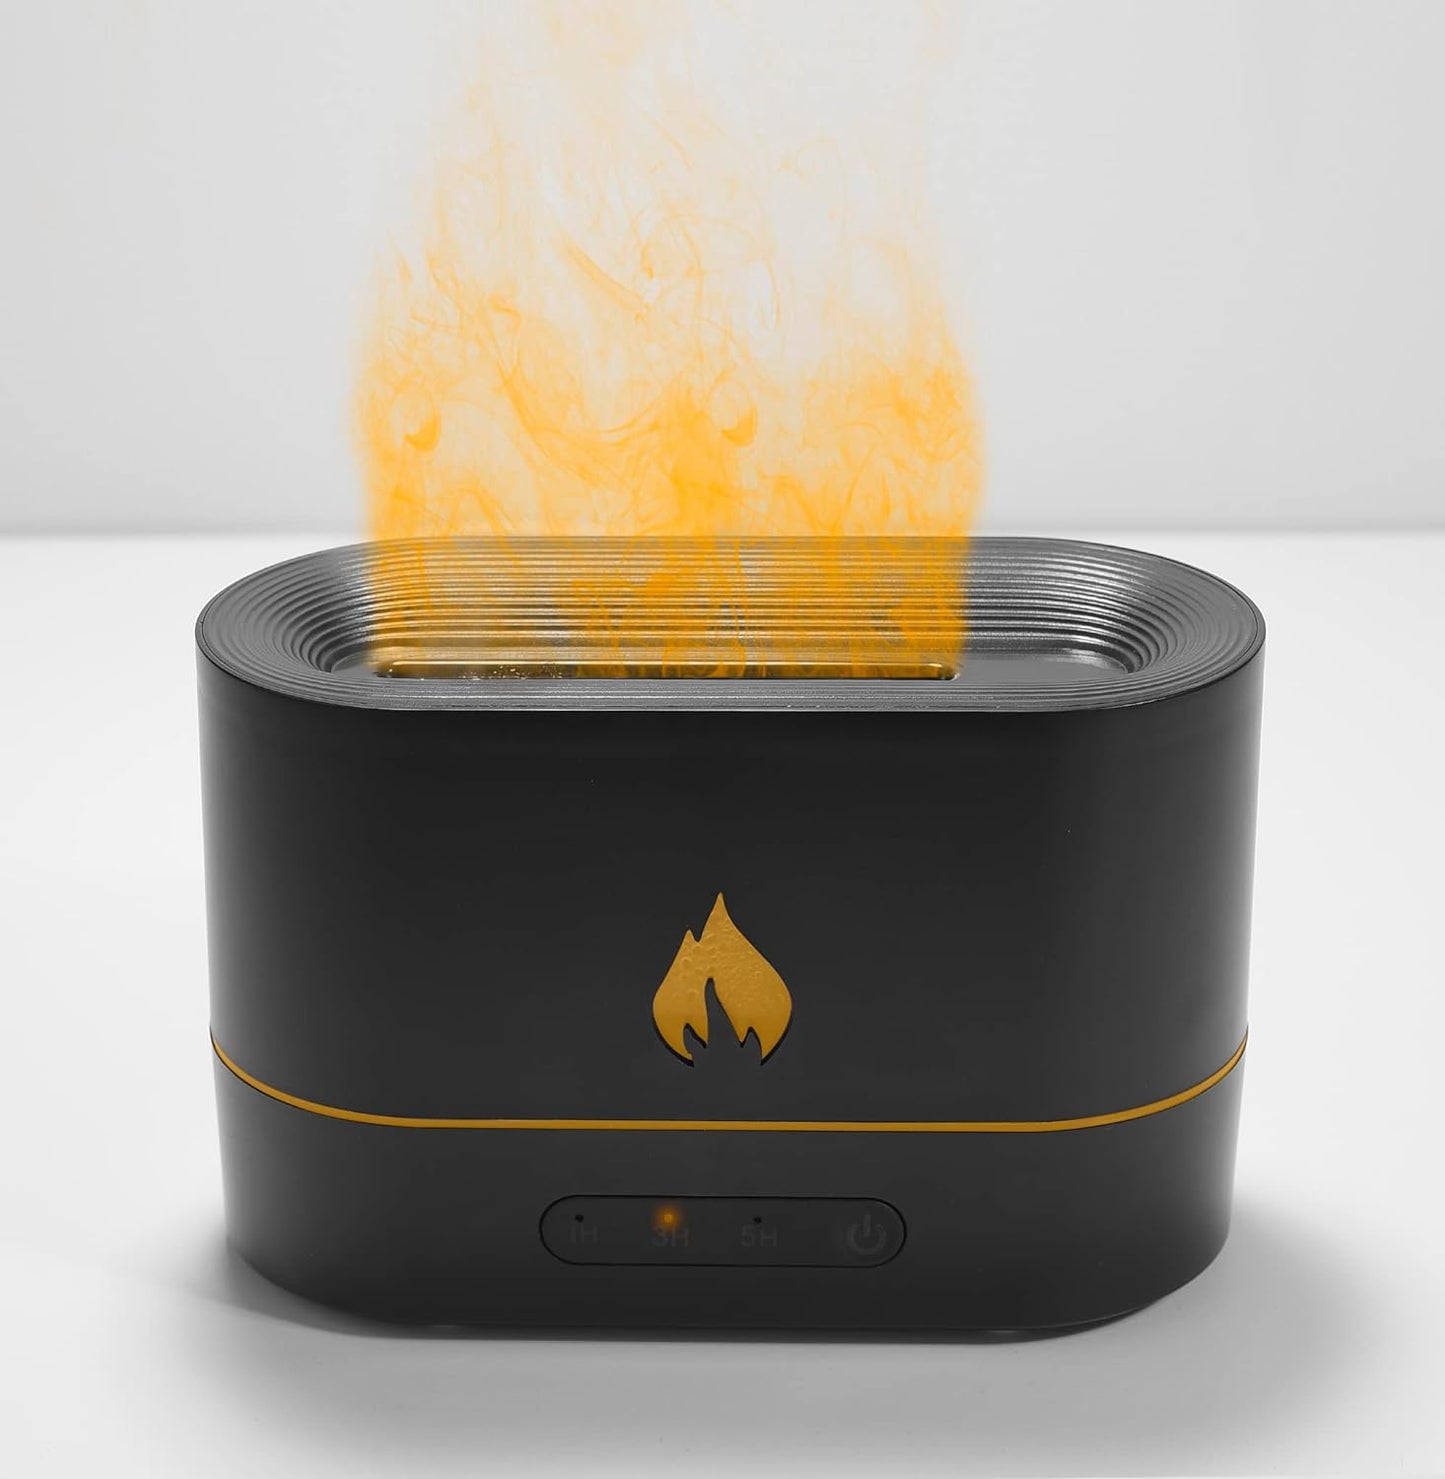 Torcher Flame Diffuser for Essential Oils - Ultrasonic Essential Oil Diffusers for Aromatherapy at Home or Office - with Auto-Shutoff; Timer Functions - Black Modern Design